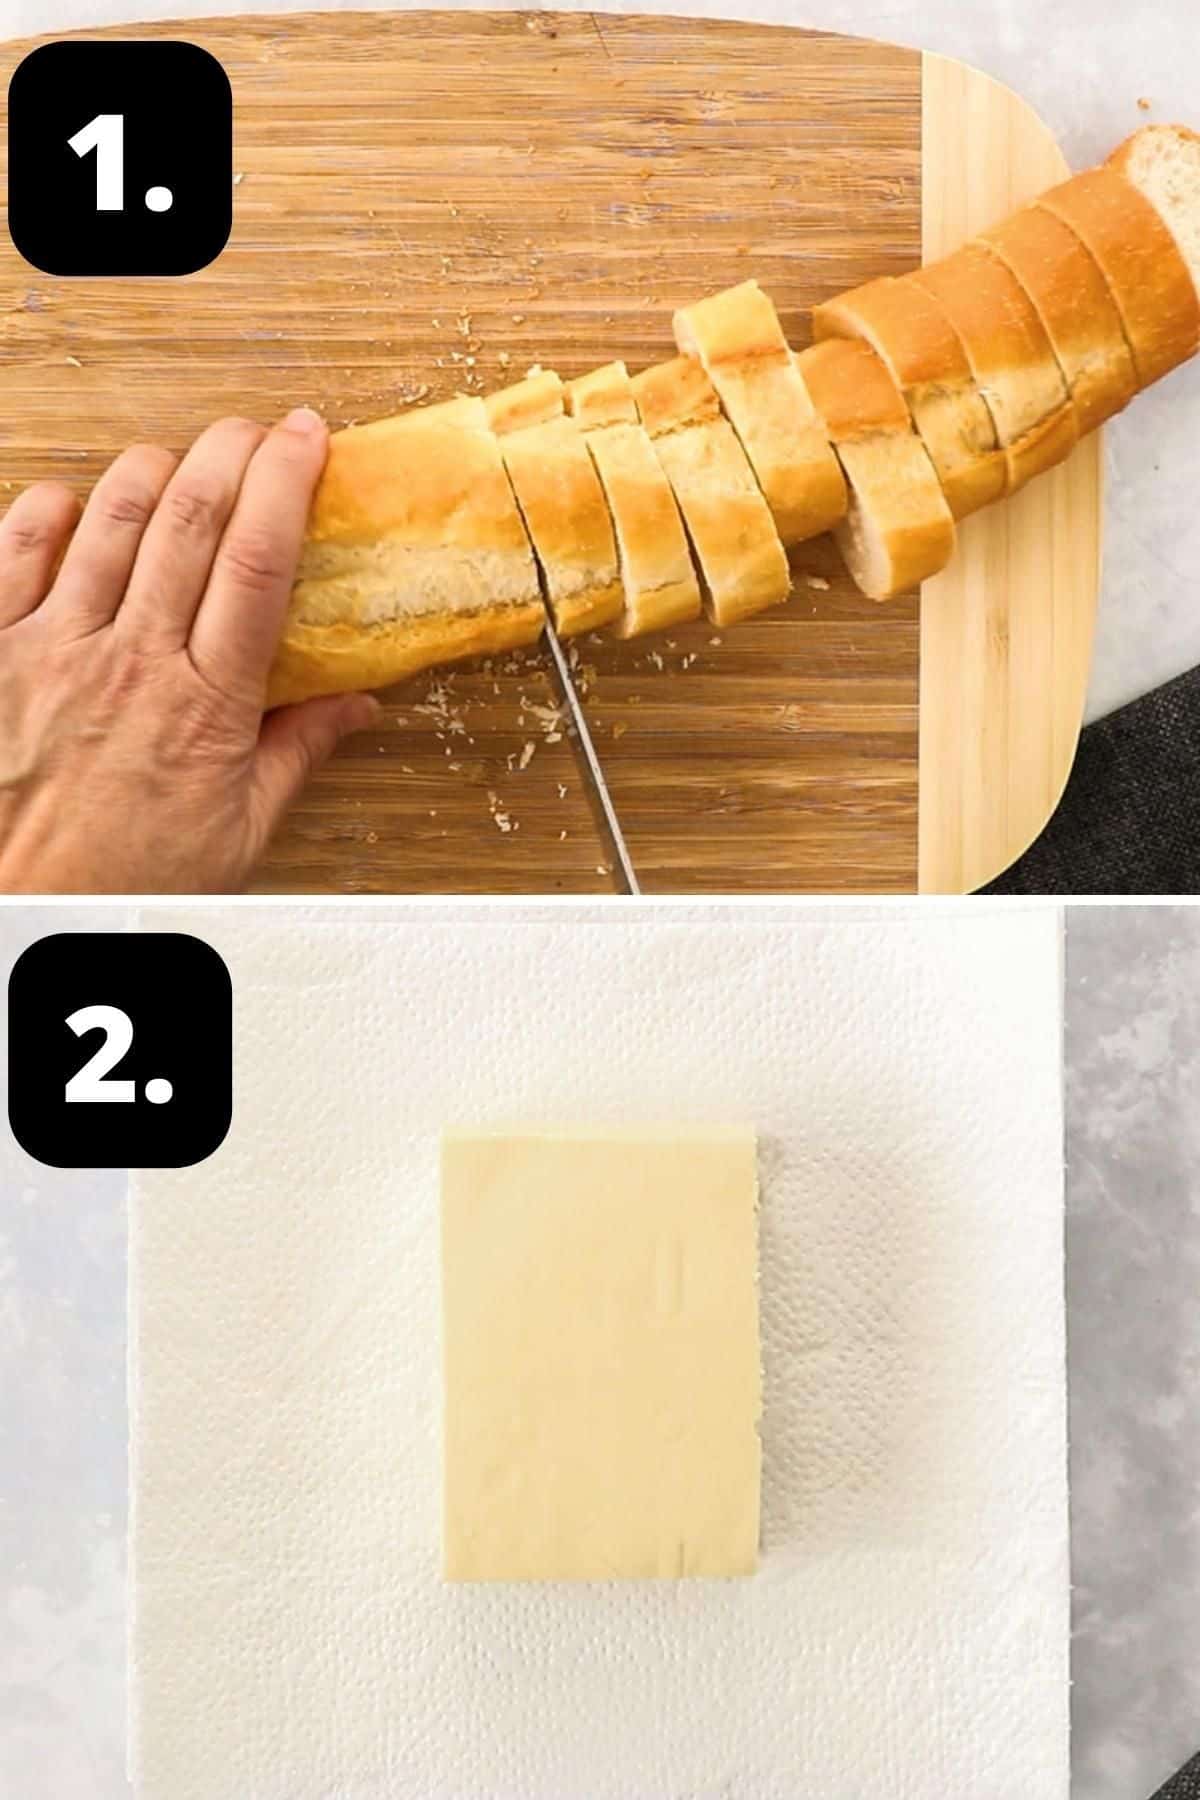 Steps 1-2 of preparing this recipe - slicing the bread and drying the tofu on paper towel.